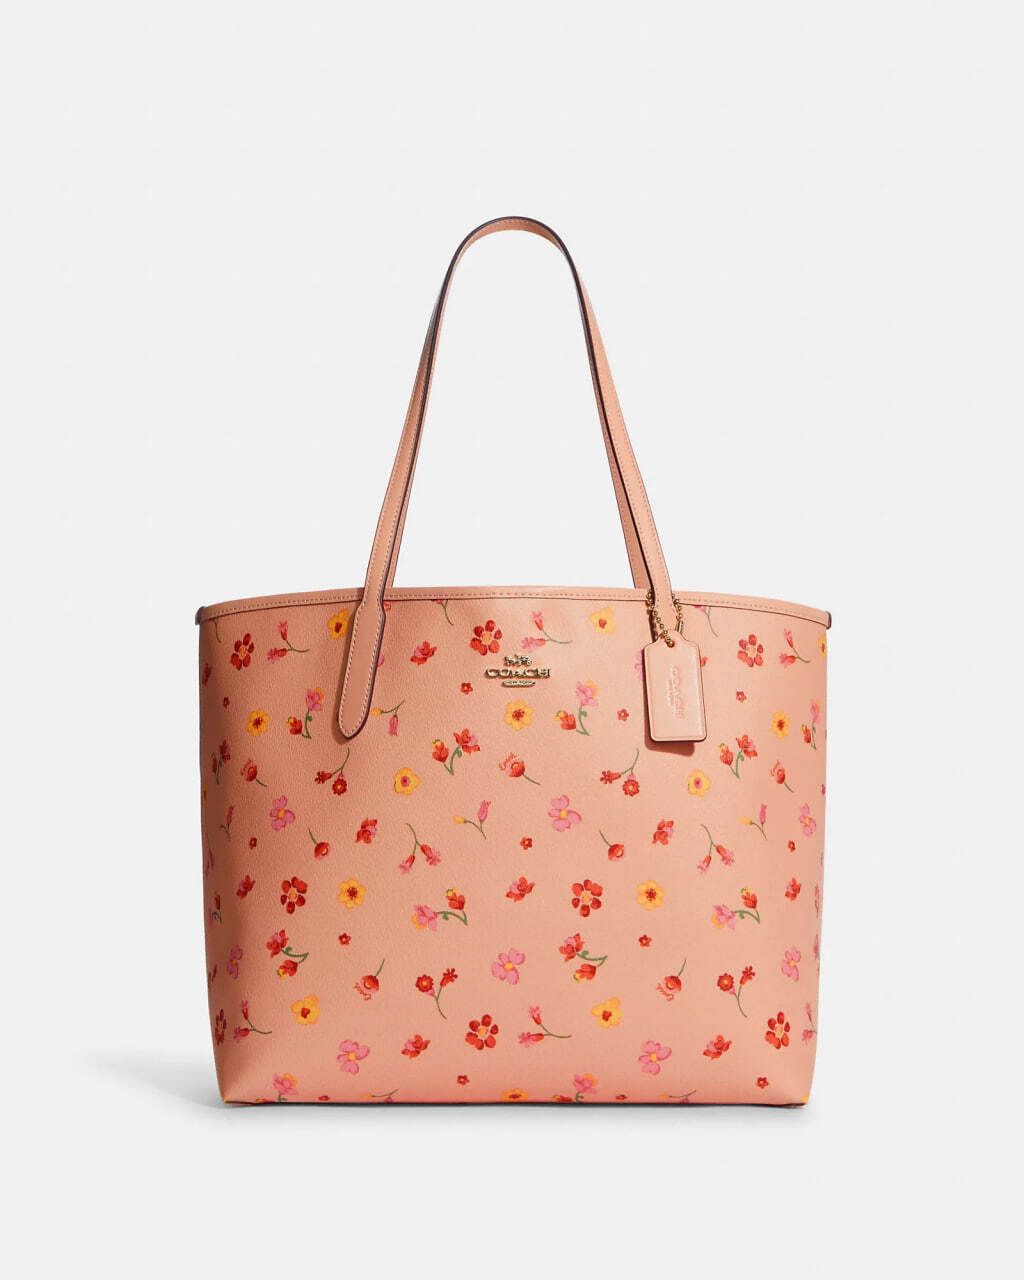 handbagbranded.com getlush outlet personalshopper usa Coach malaysia ready stock Coach City Tote With Mystical Floral Print in Faded Blush Multi